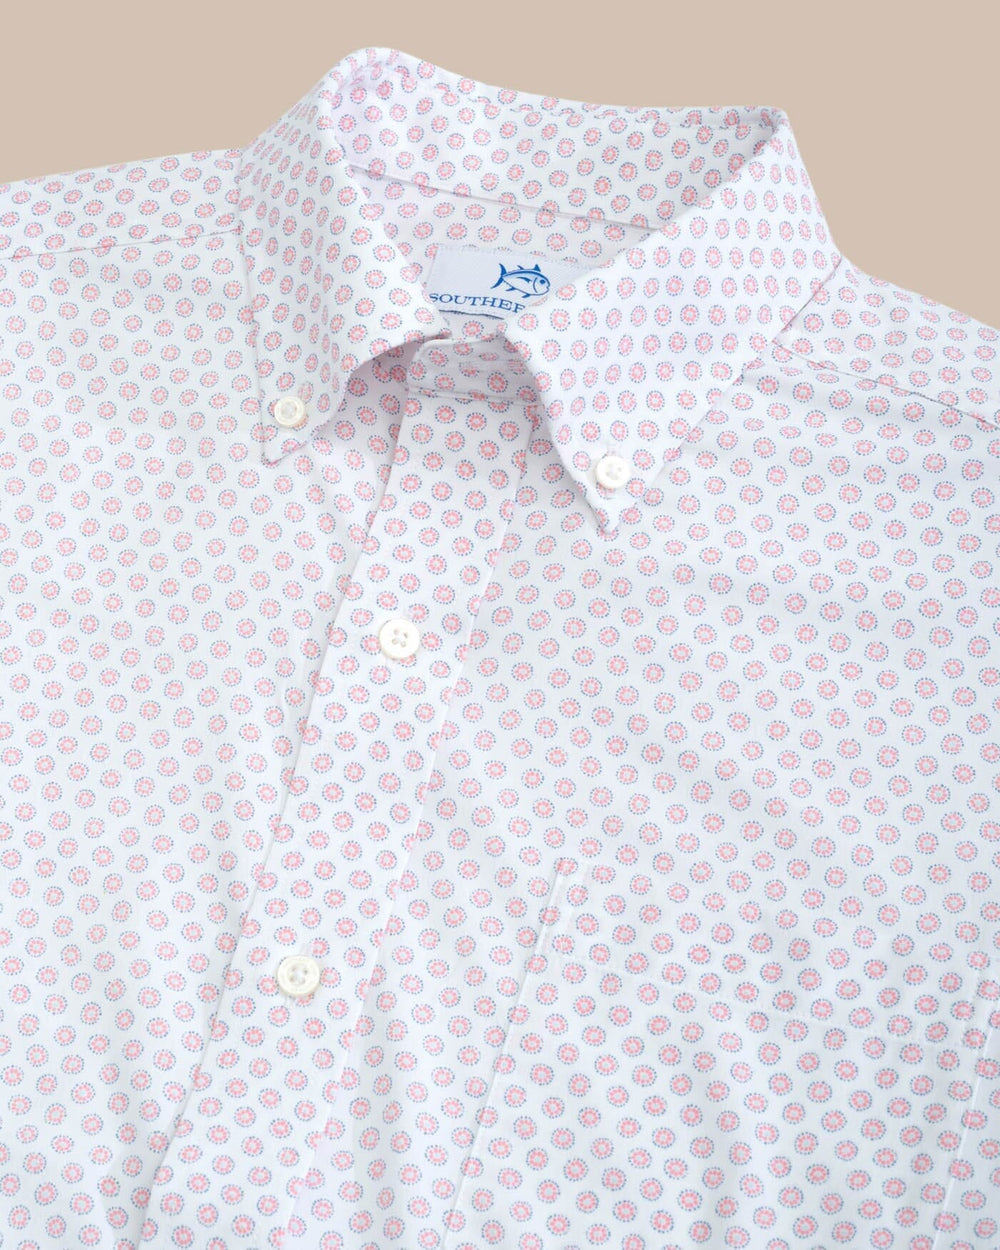 The detail view of the Southern Tide brrr Intercoastal Floral To See Short Sleeve Sportshirt by Southern Tide - Geranium Pink